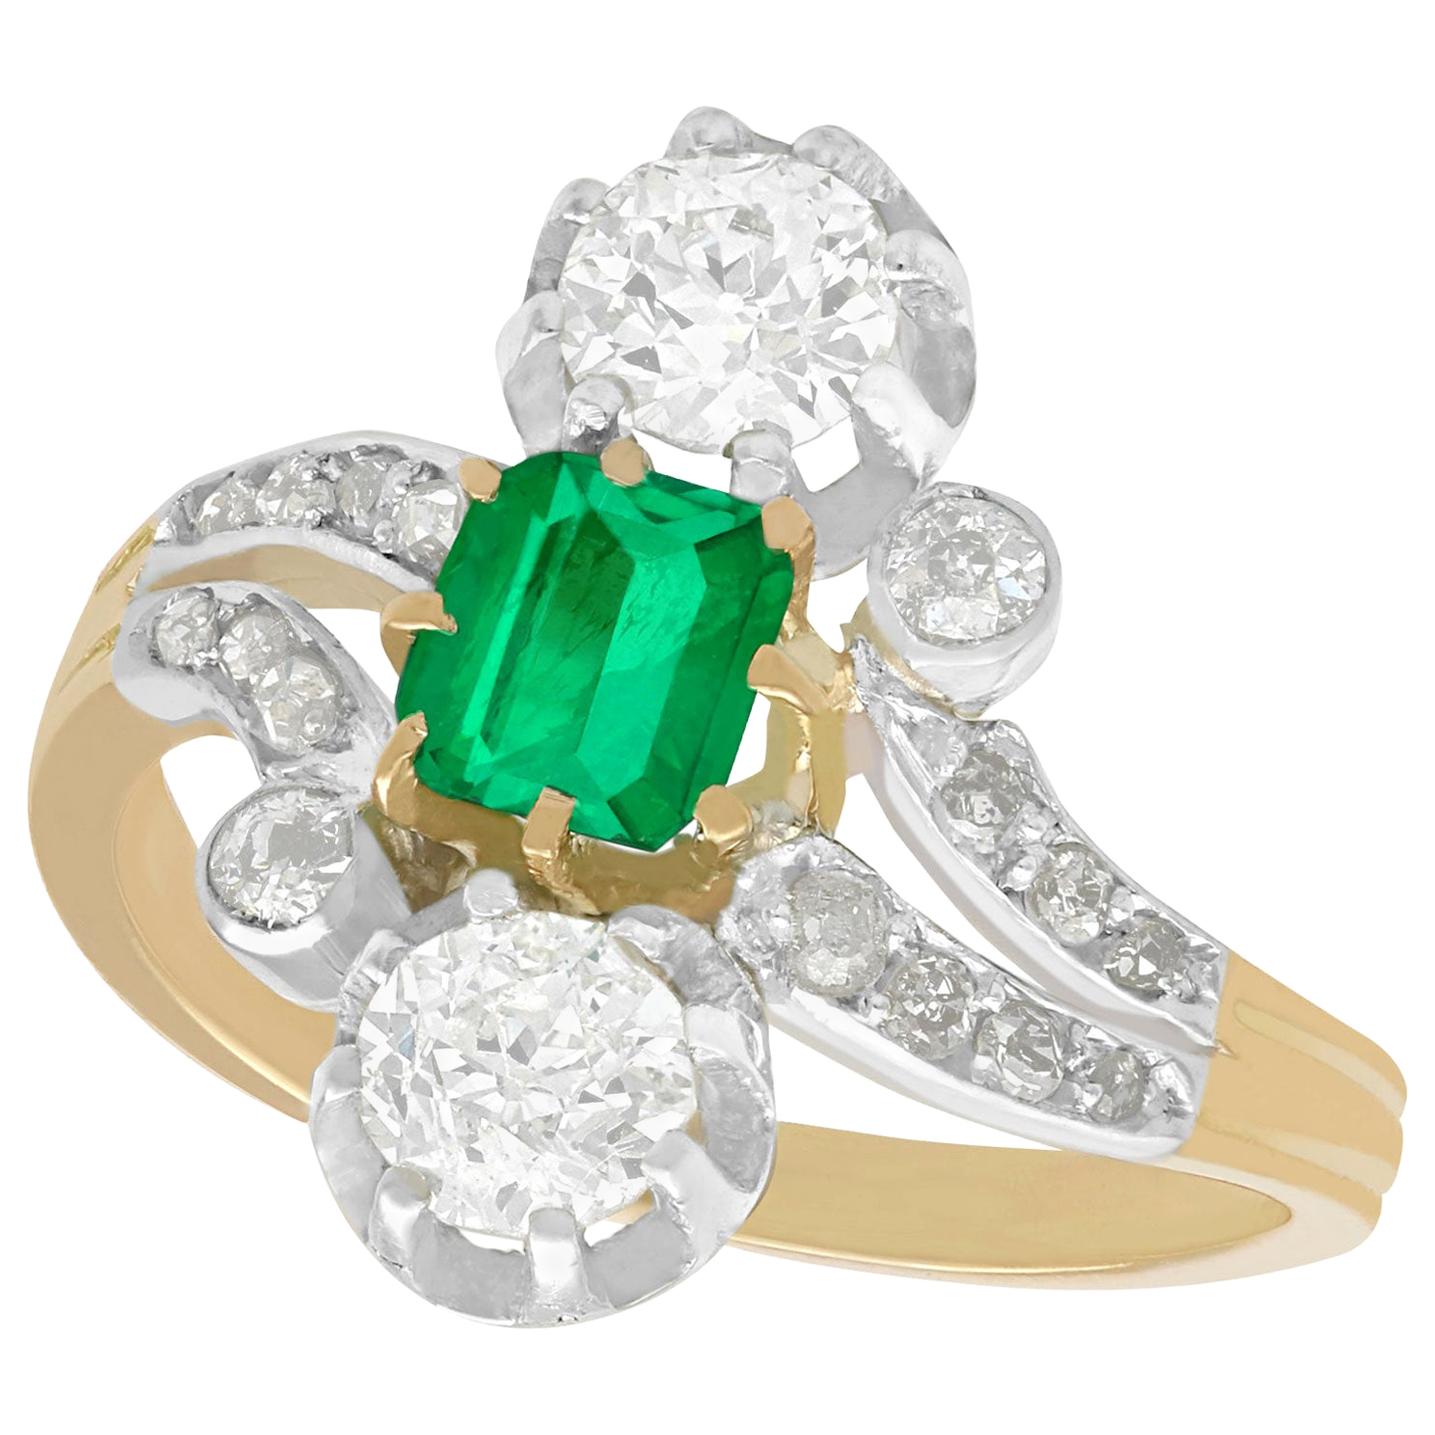 Antique 1880s 1.12 Carat Diamond and Emerald Yellow Gold Silver Set Twist Ring For Sale